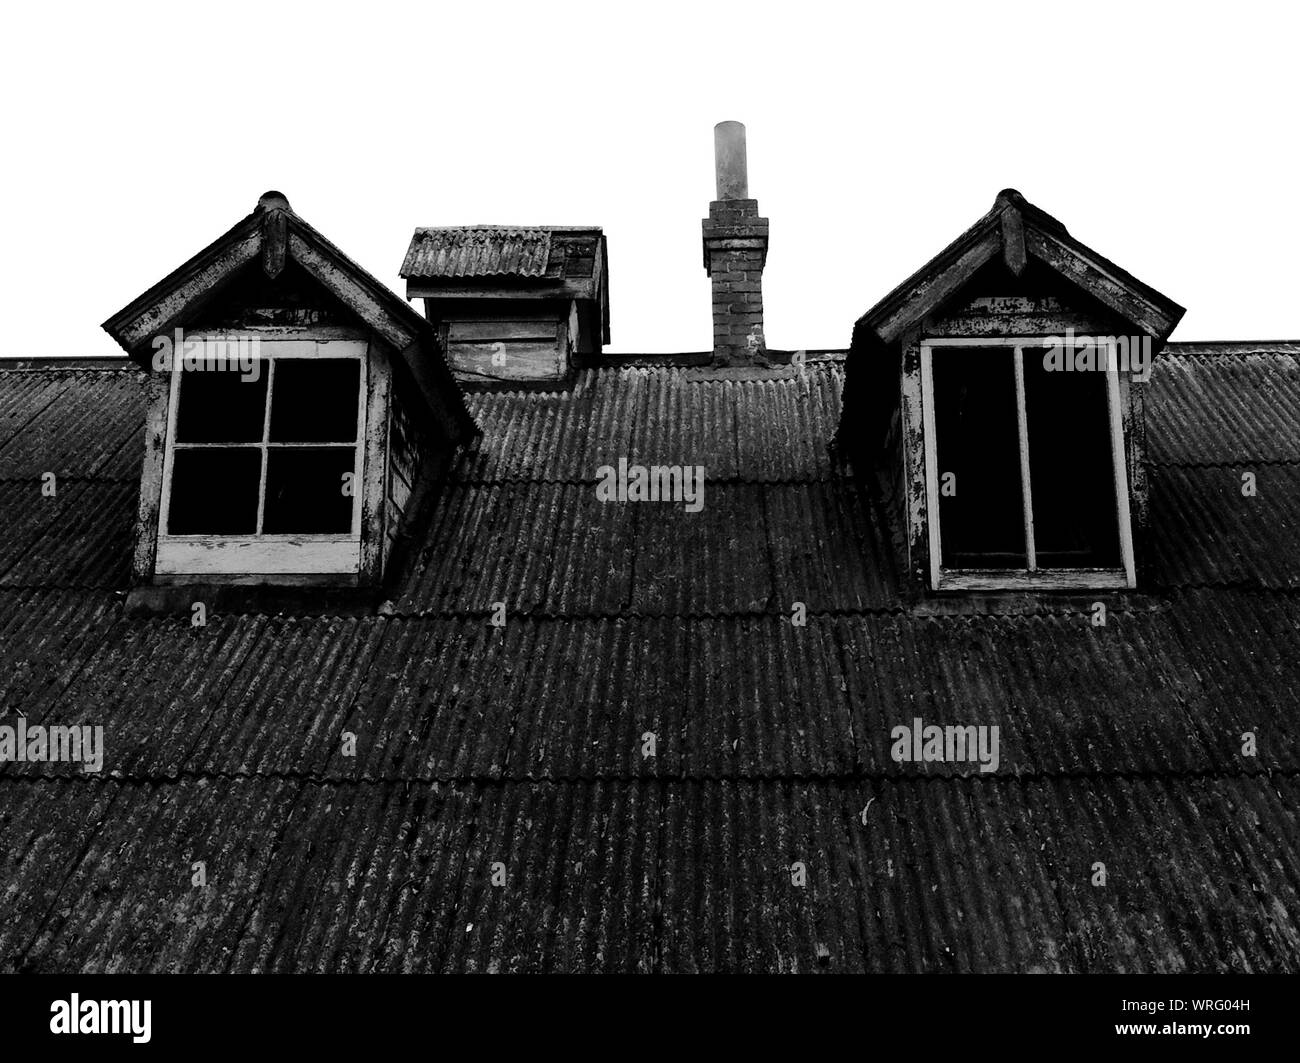 Old Roof With Dormer Windows Stock Photo